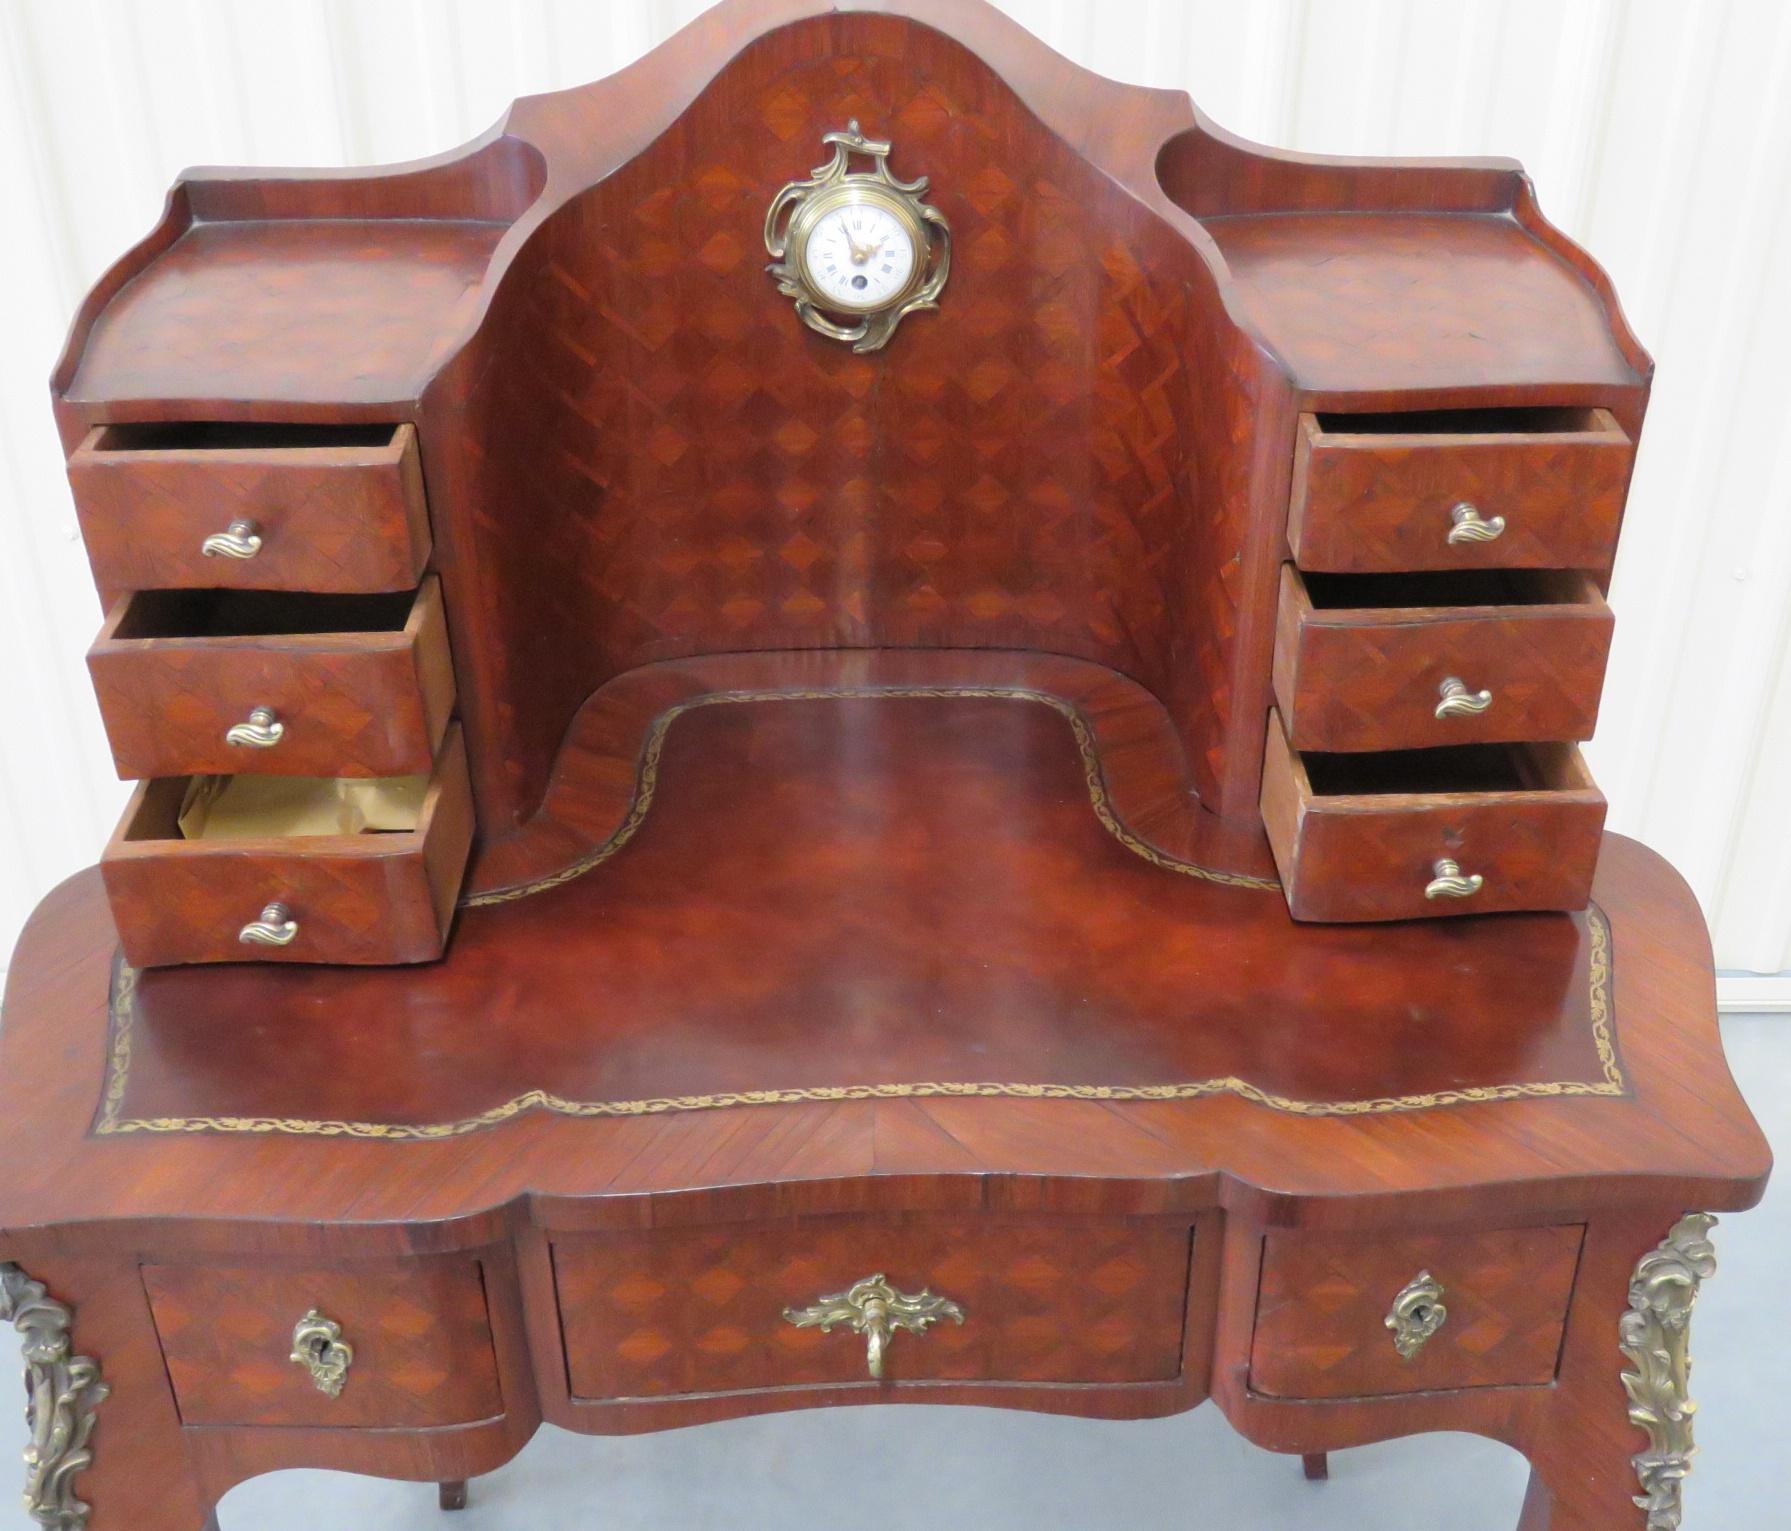 Wood Rare Size Rosewood French Louis XVI Leather Top Rosewood Desk With Clock 